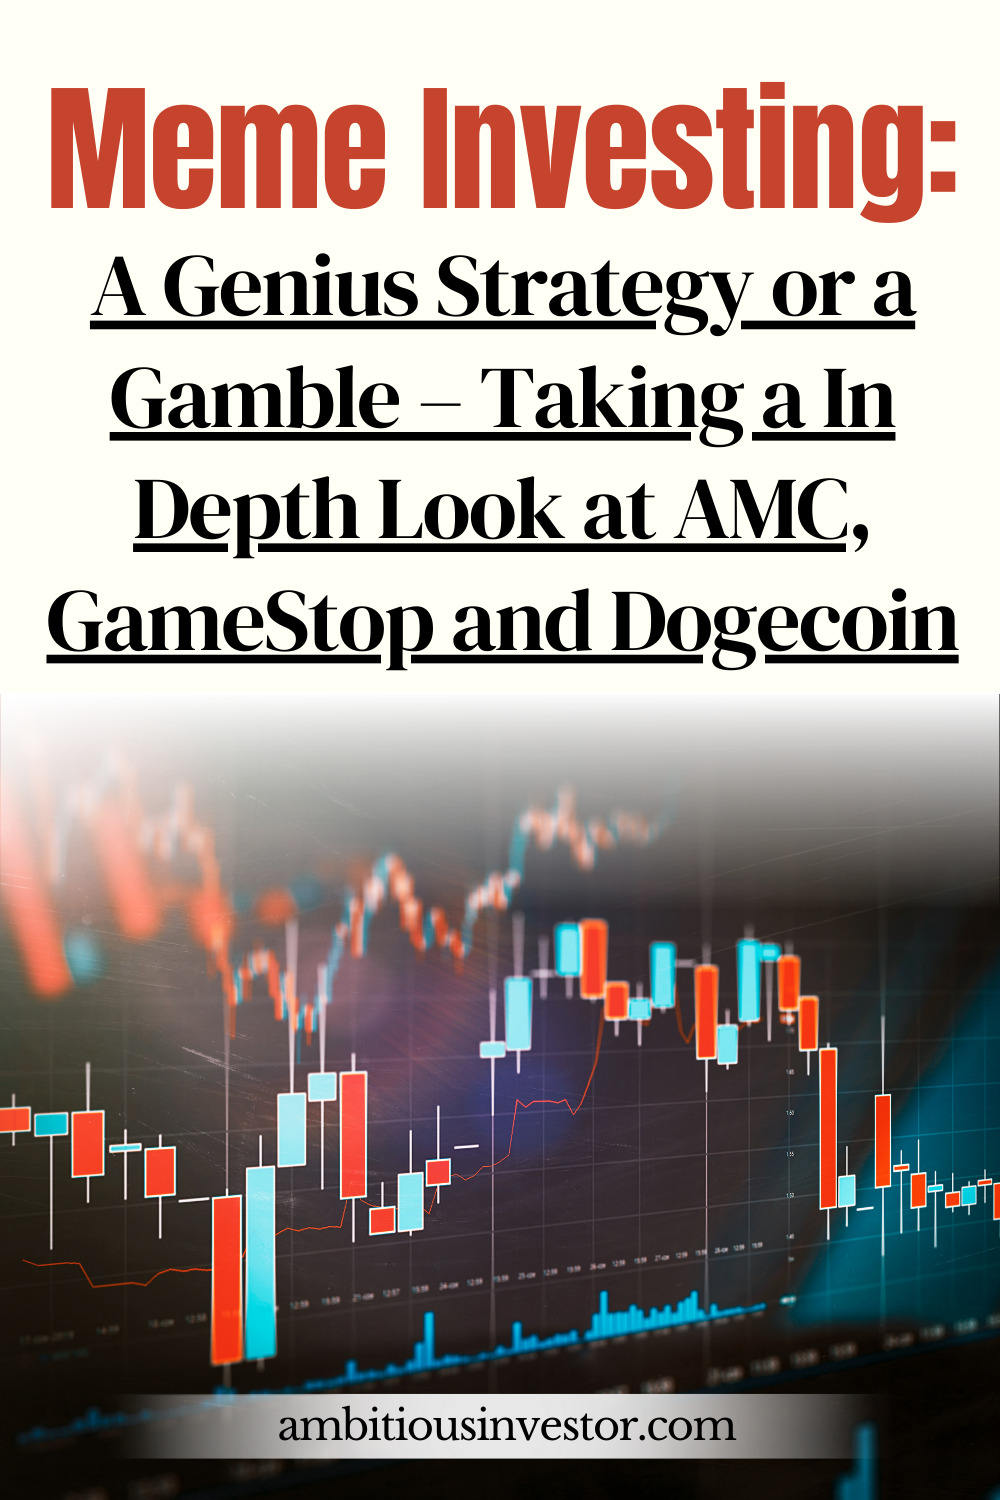 Meme Investing: A Genius Strategy or a Gamble – Taking a In Depth Look at AMC, GameStop and Dogecoin